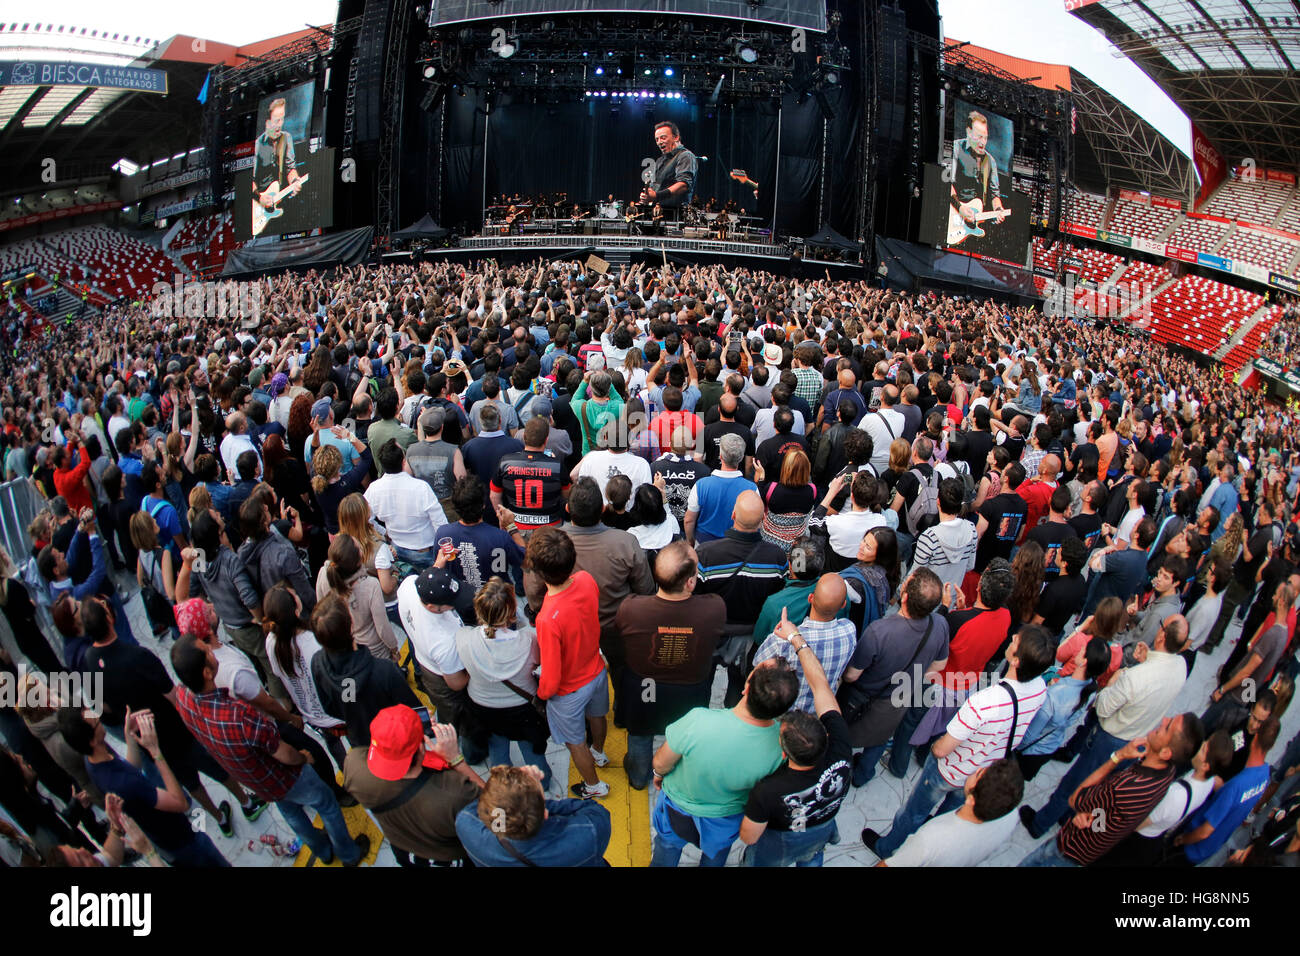 Gijon Asturias, Spain. June 26, 2013. Wide angle view of  Bruce Springsteen, the Boss, in concert with the E Street Band, Stock Photo